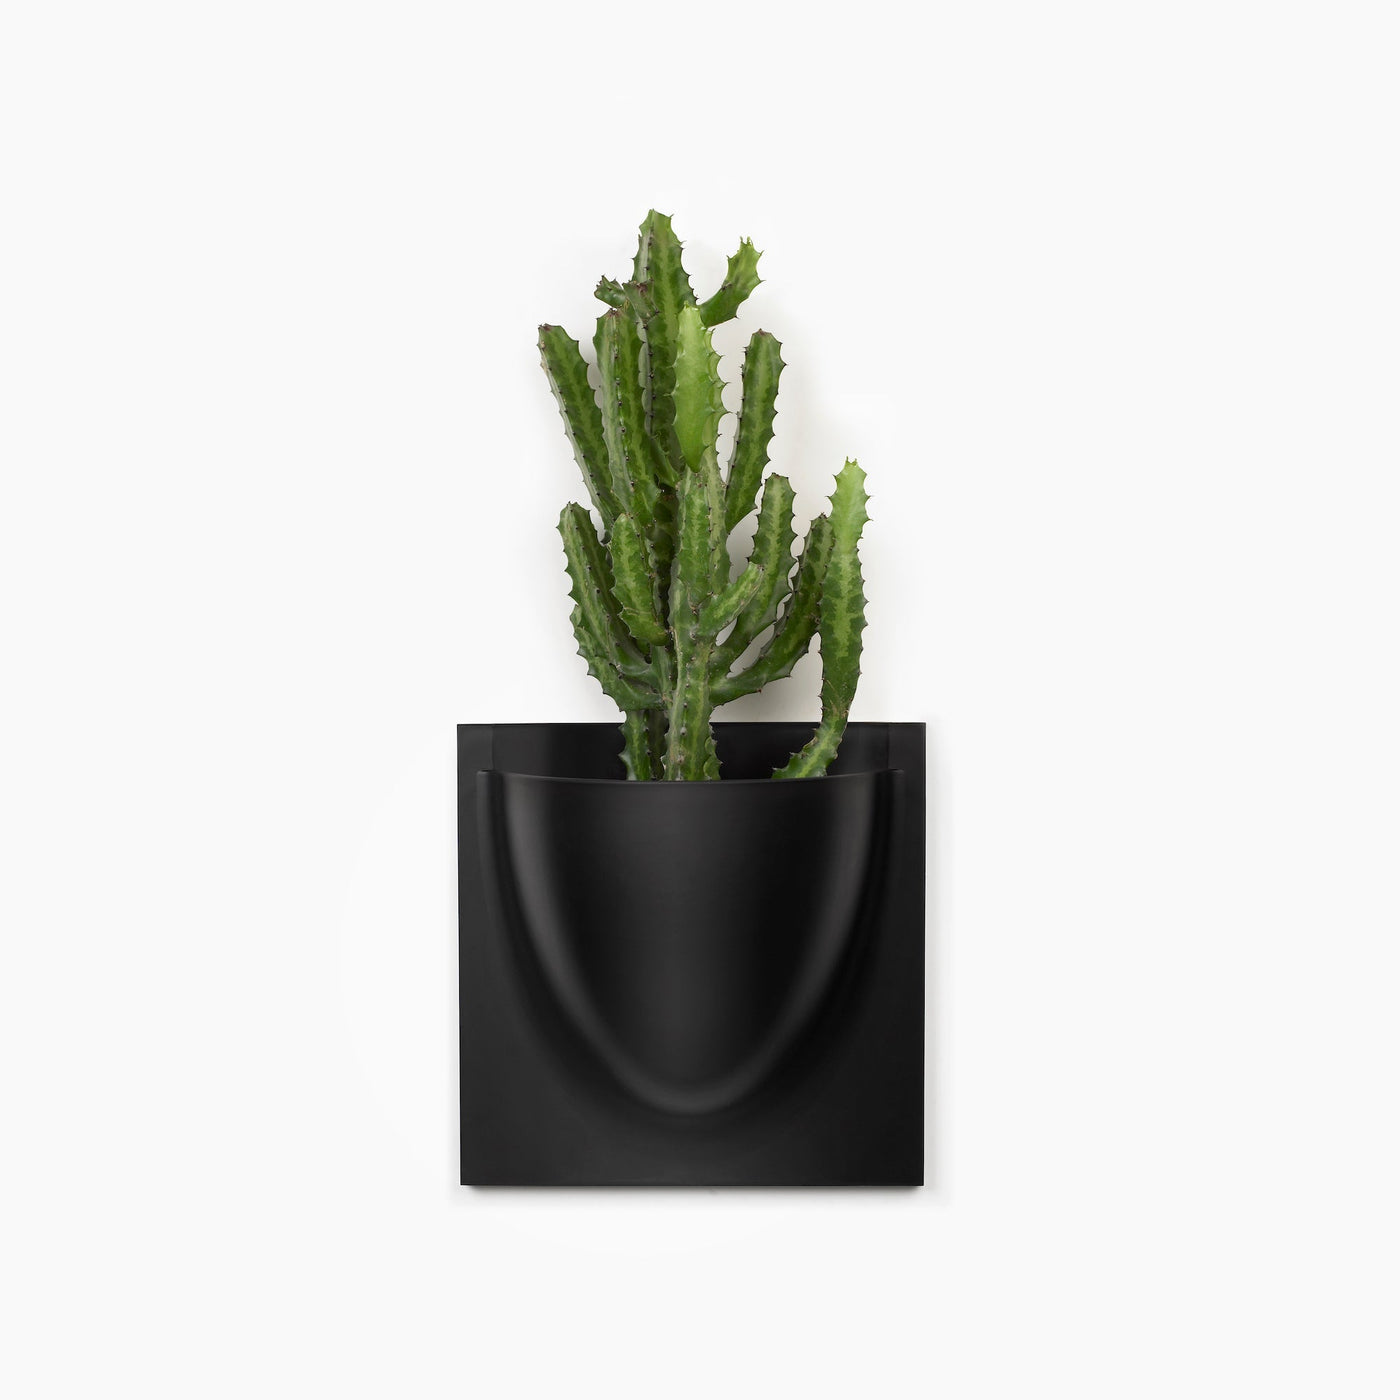 Oyster White VertiPlant Bio Wall Container-Home Goods-BOXES / ORGANISERS / CONTAINERS, SUPPORT / BASES / STANDS, SUSTAINABLE DECOR, VERTI, WALL HANGERS-Forest Homes-Nature inspired decor-Nature decor